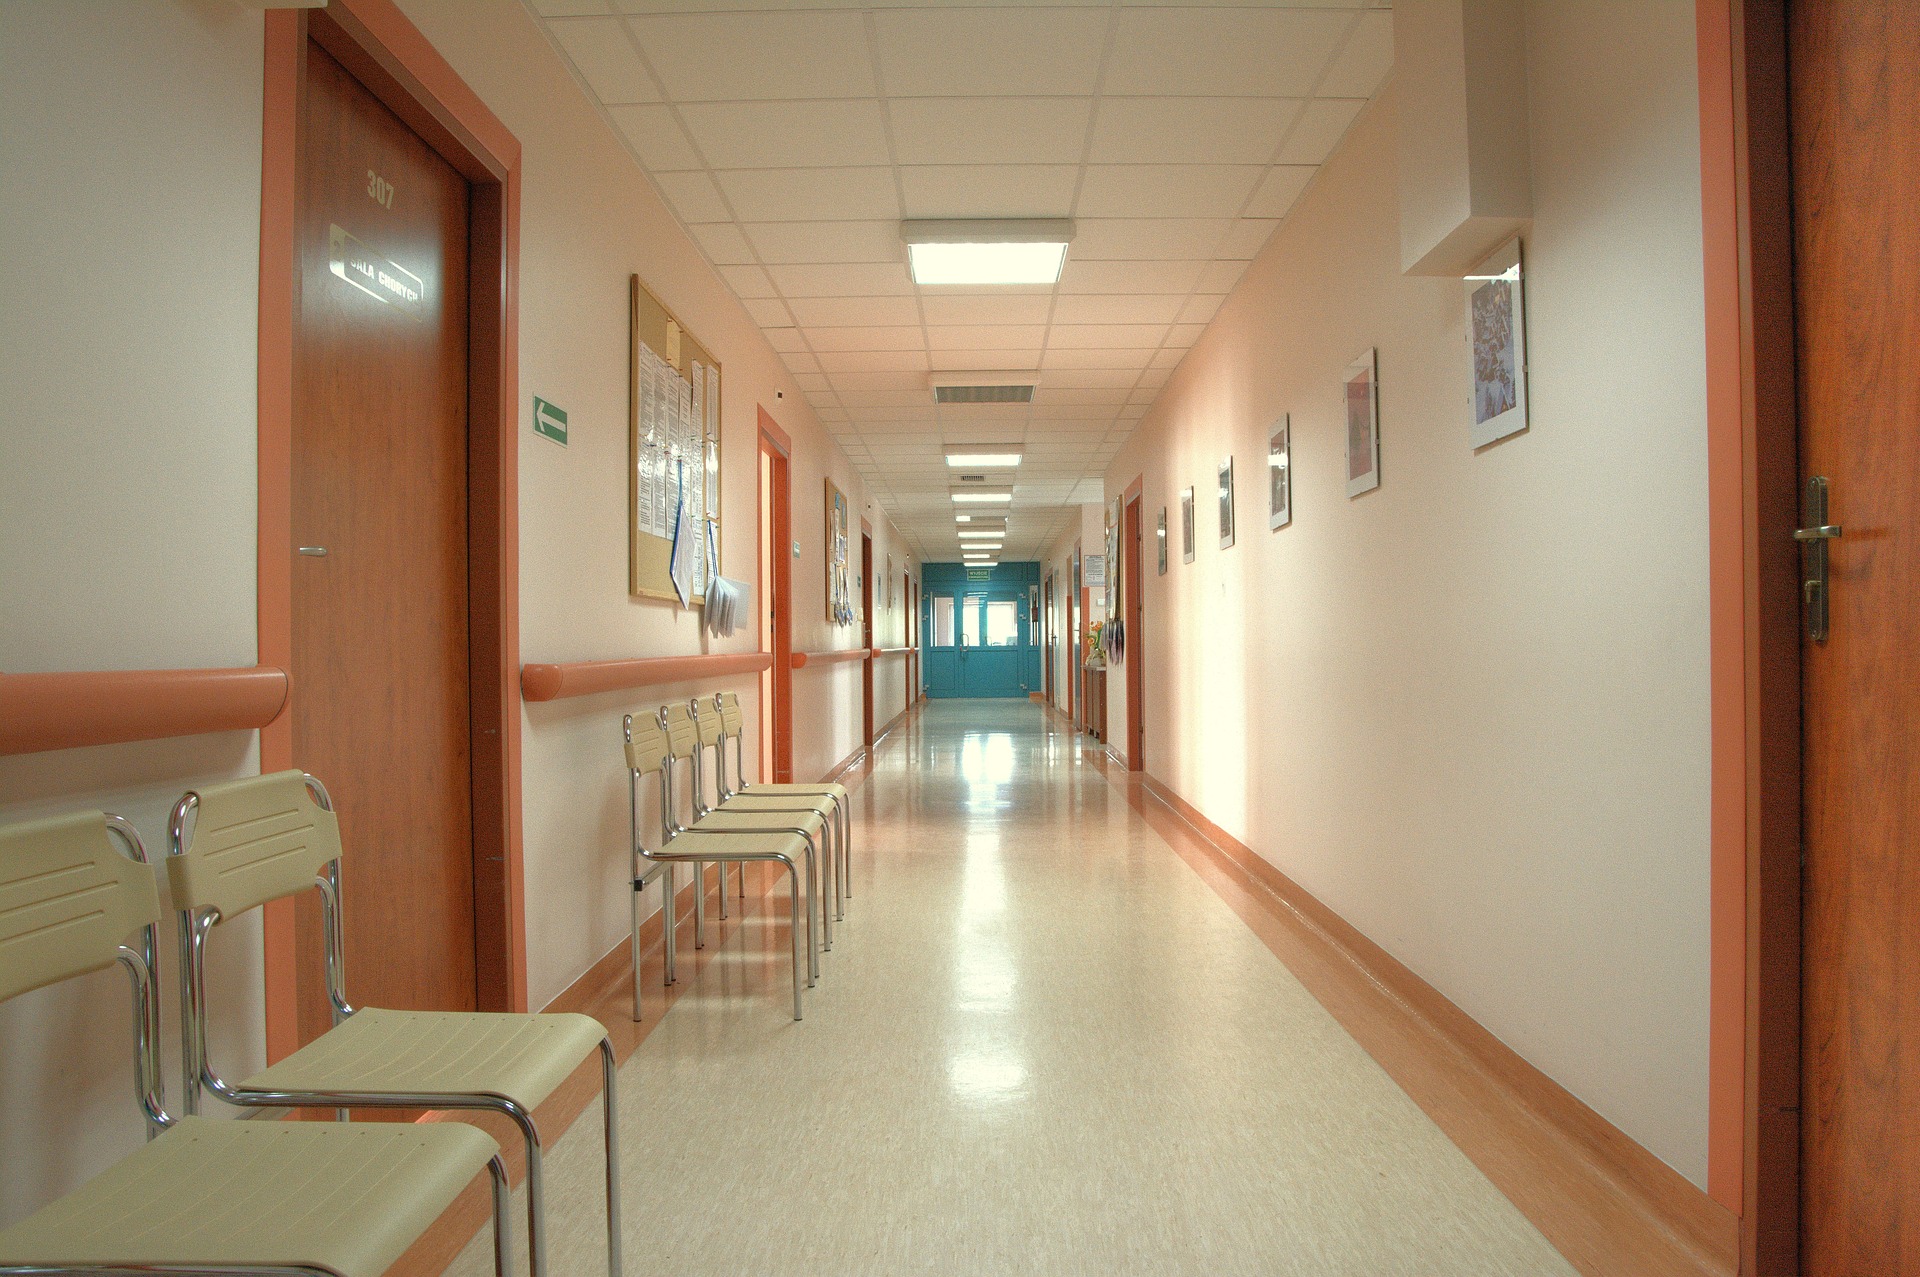 Greek NHS: The new hospitals show the funding deficit